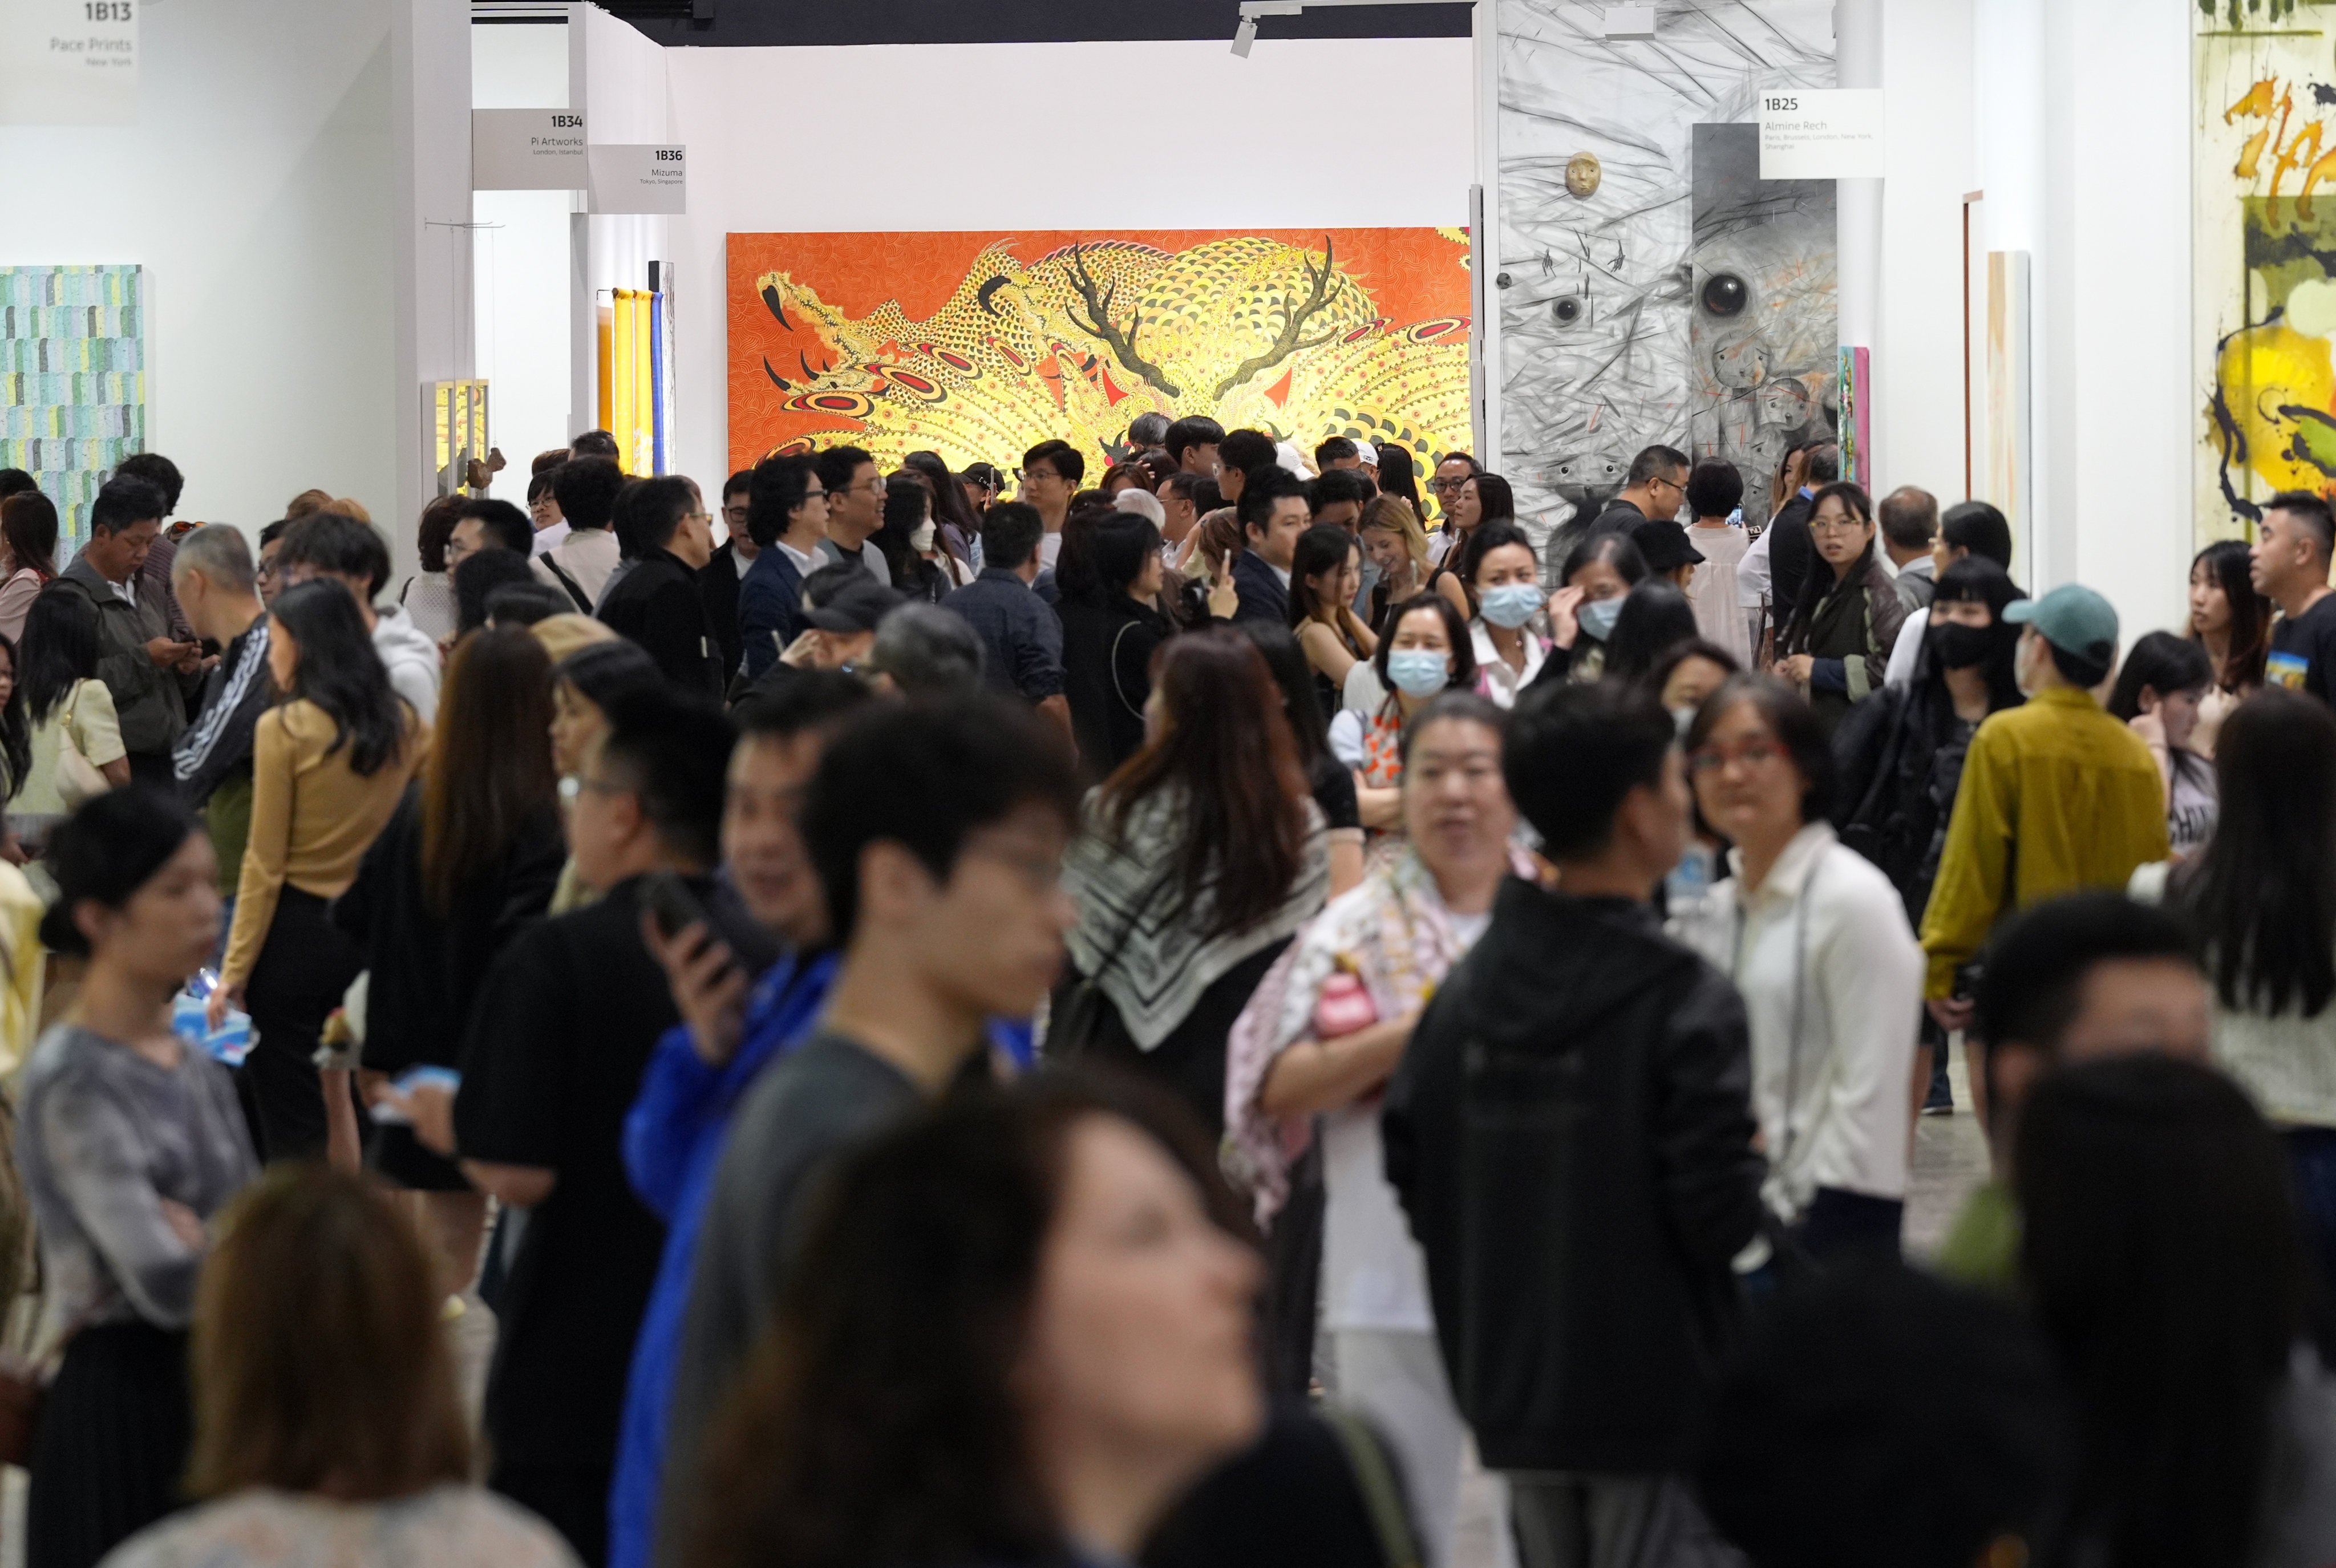 Visitors admire artworks at Art Basel Hong Kong, the highlight of Art Week in the city, as the contemporary art fair opens for public visitors at the Hong Kong Convention and Exhibition Centre in Wan Chai. Photo: Eugene Lee